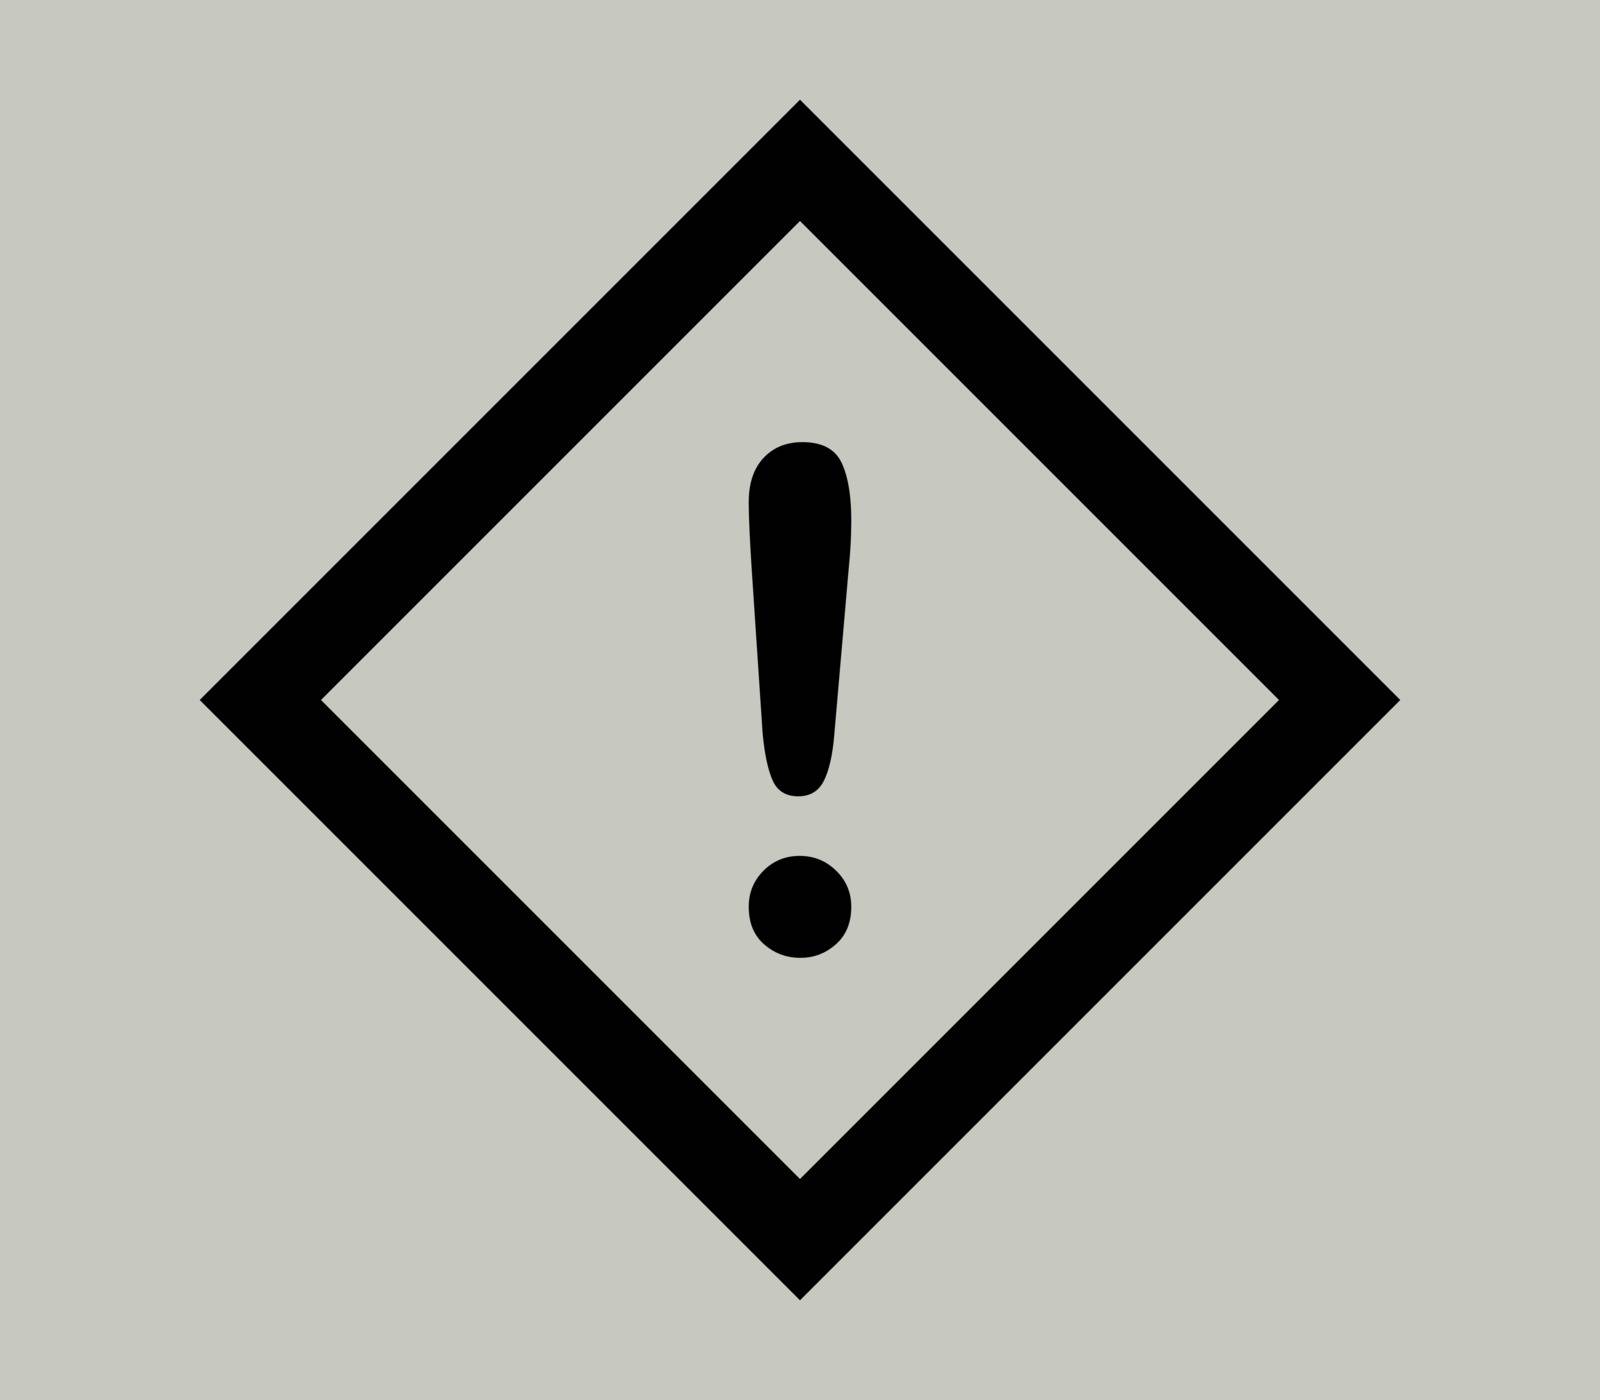 danger sign icon by Mark1987